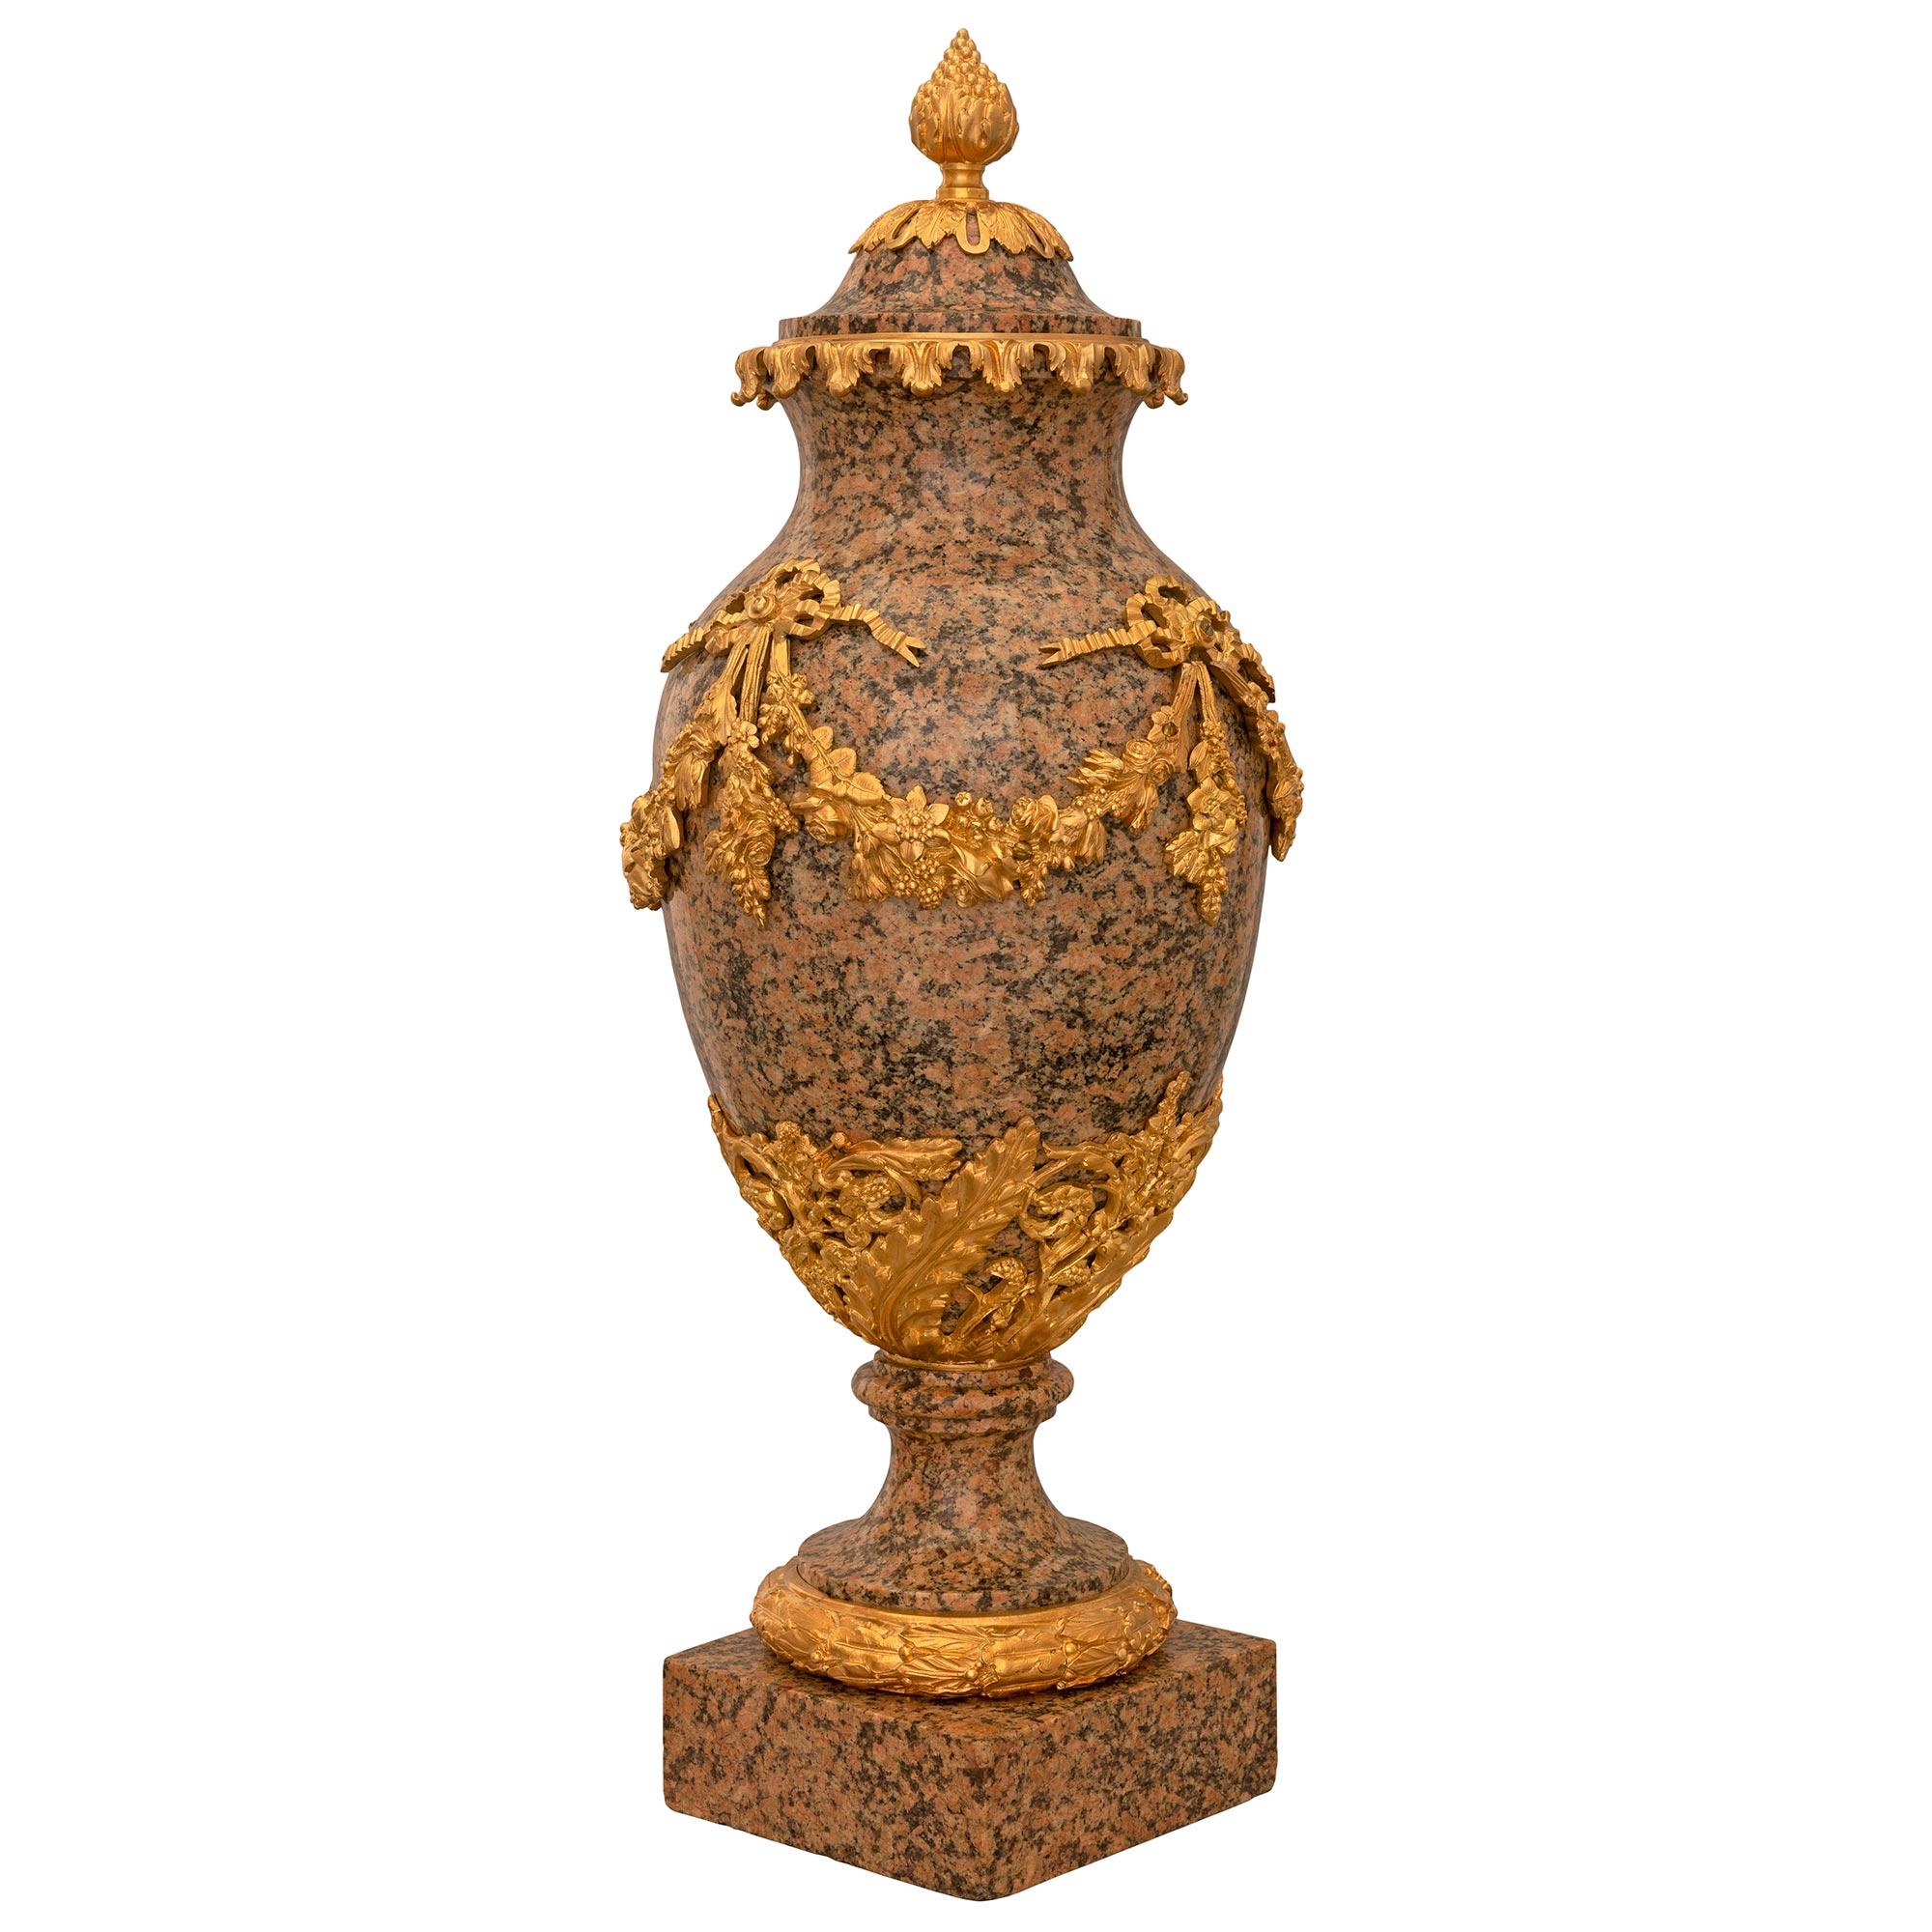 French Pair of 19th Century Louis XVI Style Granite and Ormolu-Mounted Lidded Urns For Sale